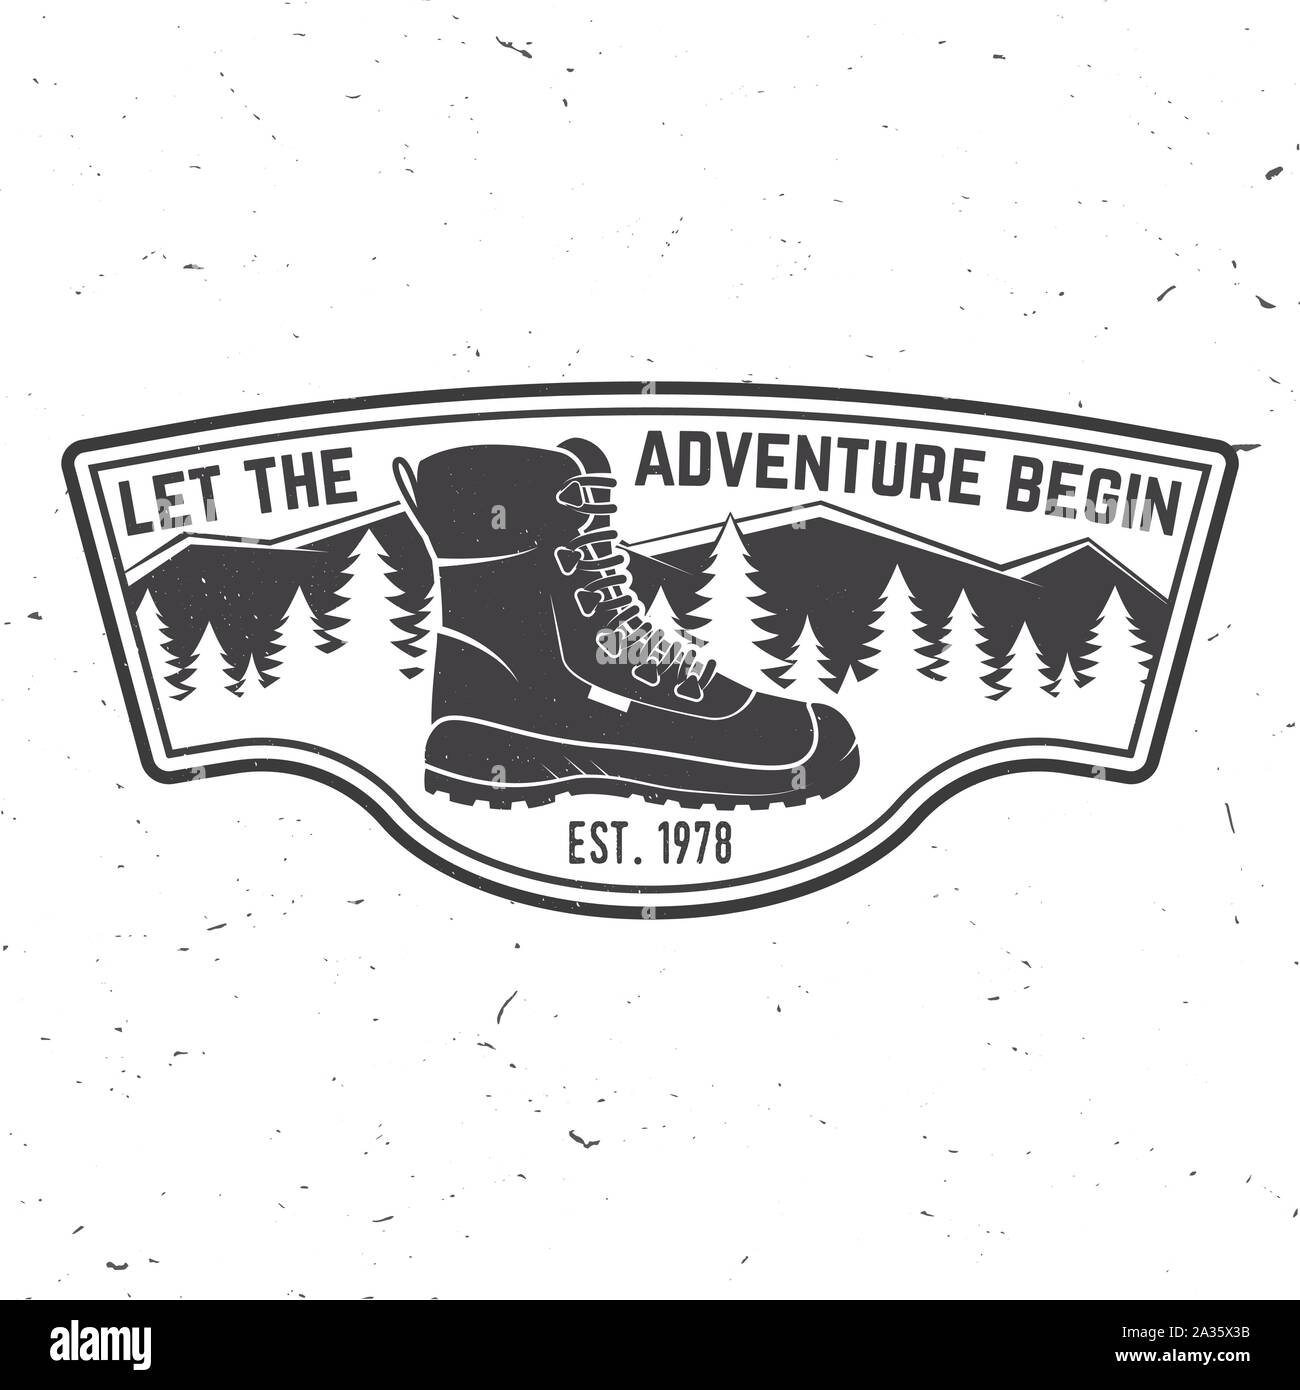 Let the adventure begin. Summer camp. Vector illustration. Concept for shirt or logo, print, stamp or tee. Vintage typography design with hiking boots, mountains, sky and forest silhouette. Stock Vector